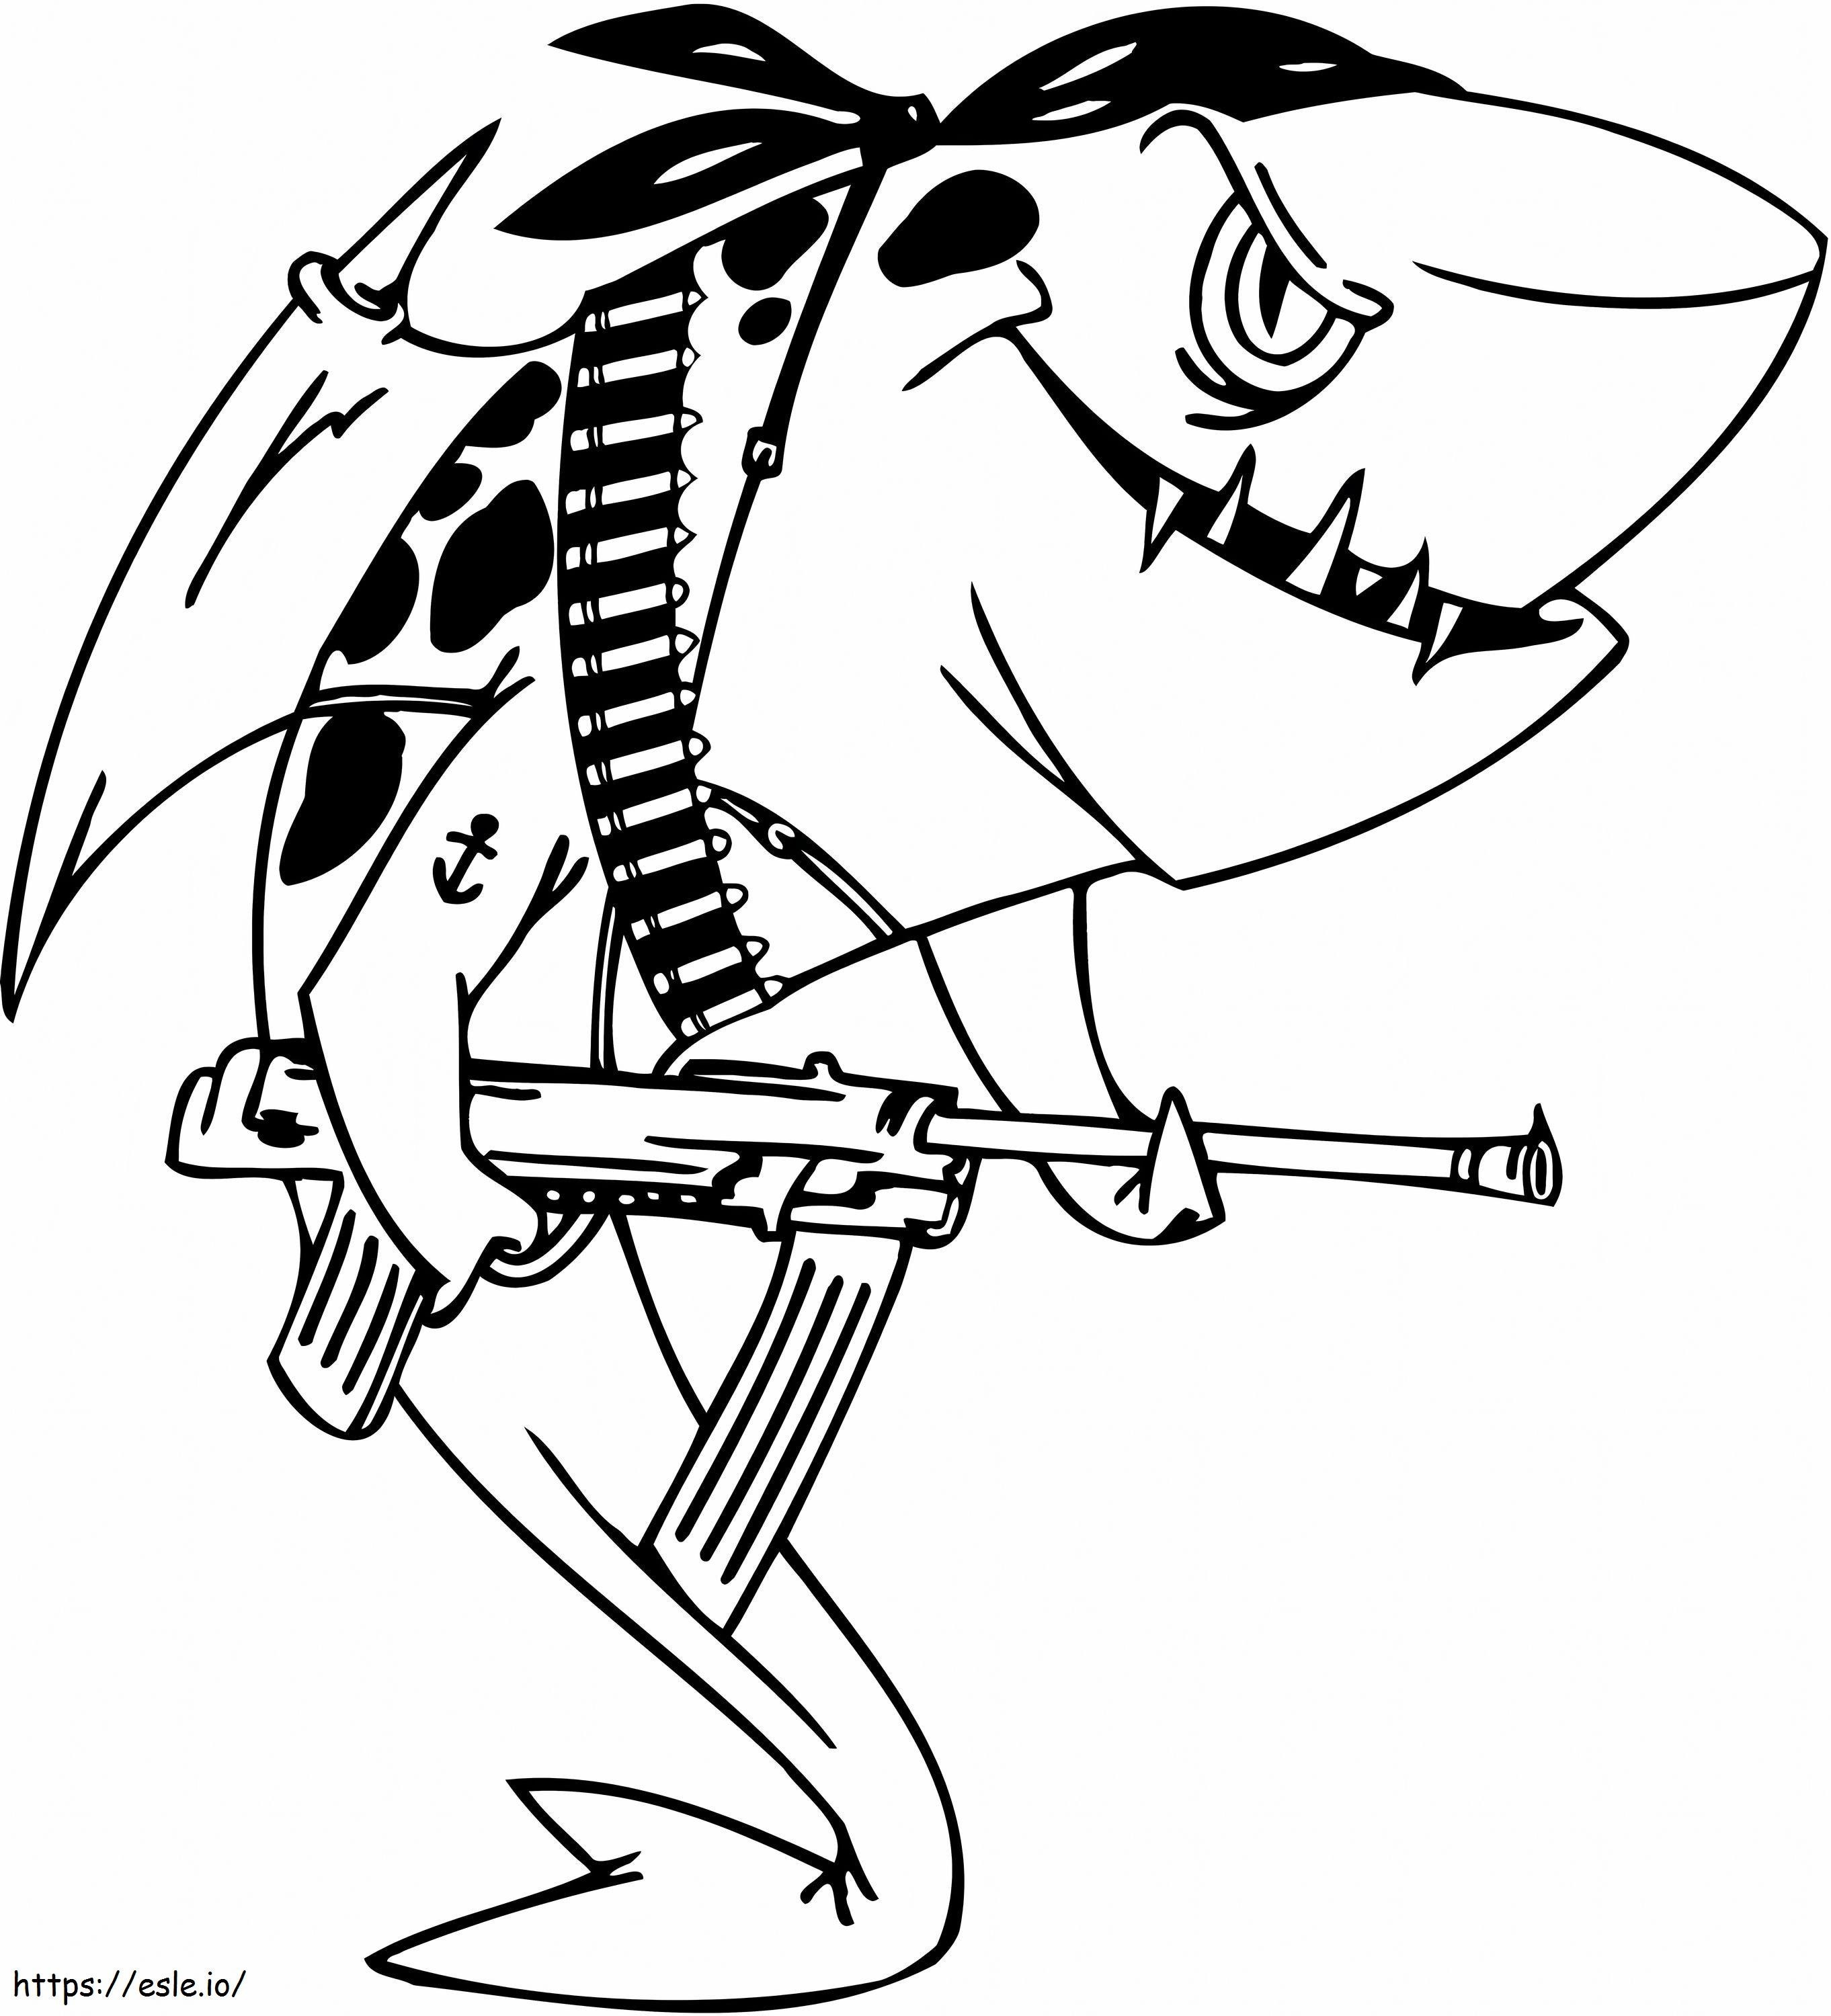 1541748711 Shark Color Page Funny coloring page